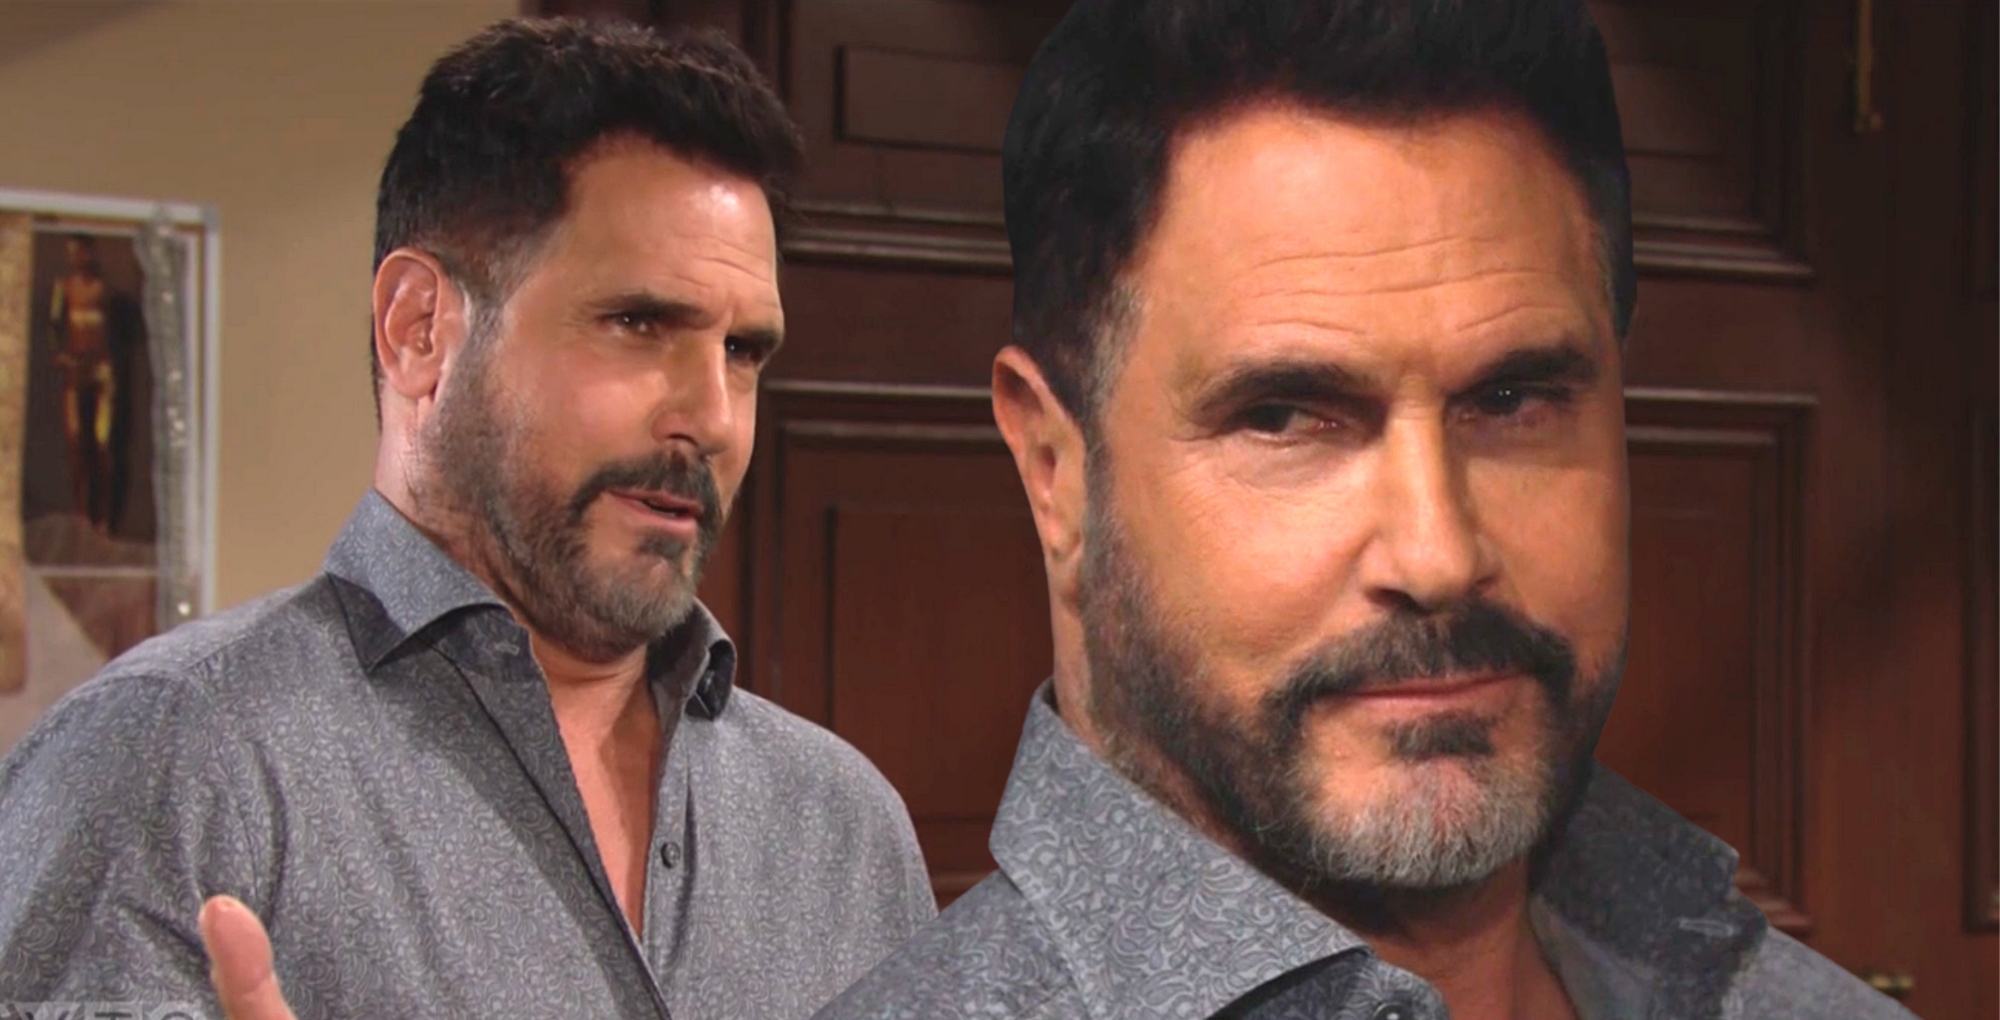 b&b spoilers speculation teases bill spencer has his future wide open.